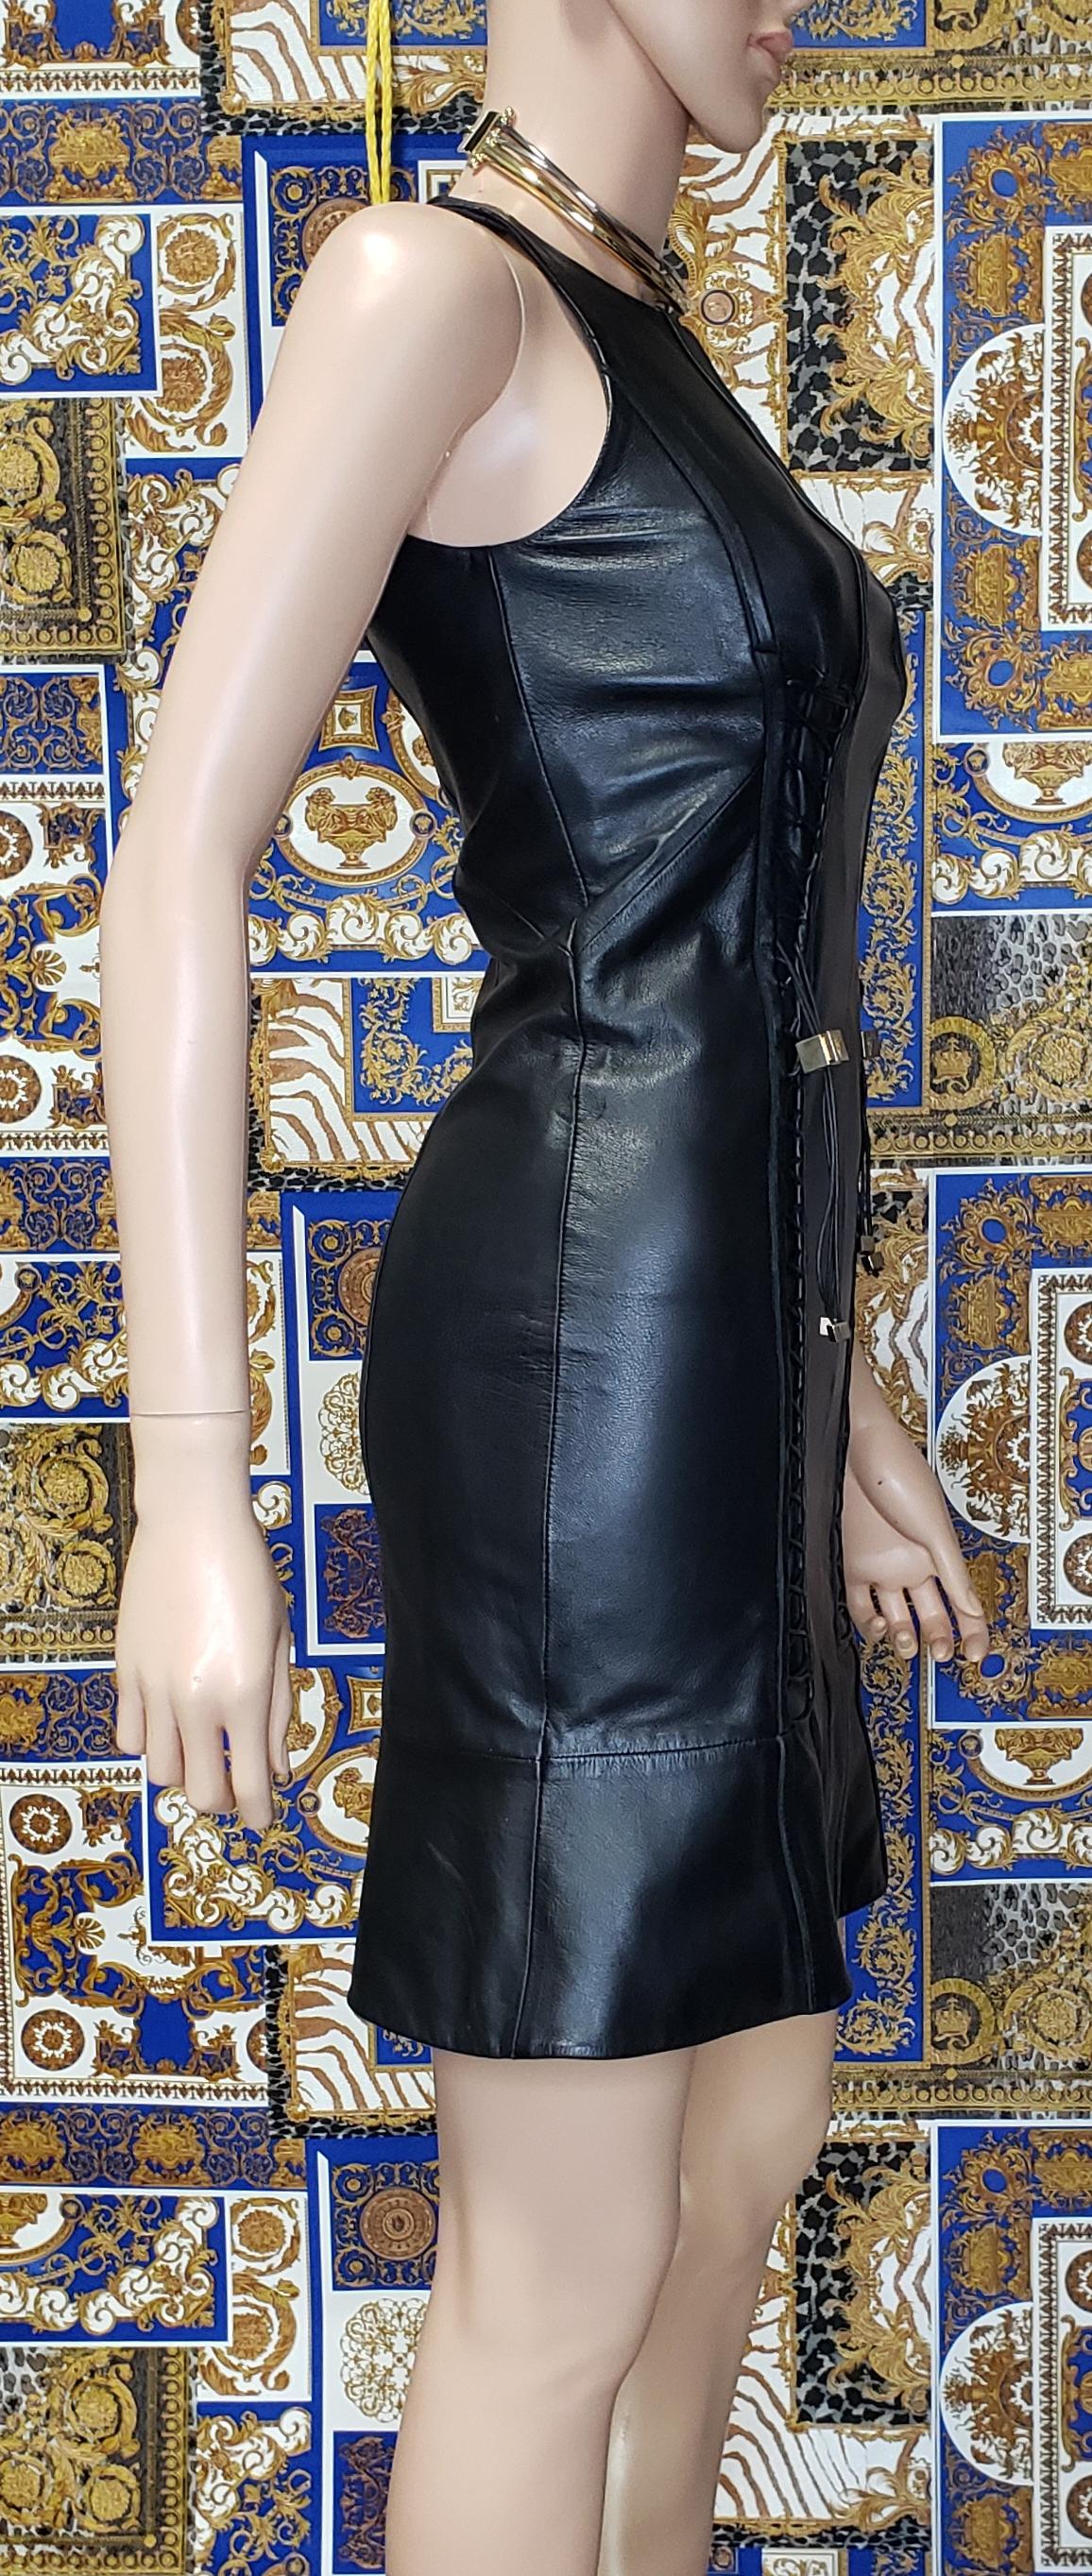 Women's VERSACE COLLECTION BLACK LEATHER DRESS with TASSELS 38 - 4